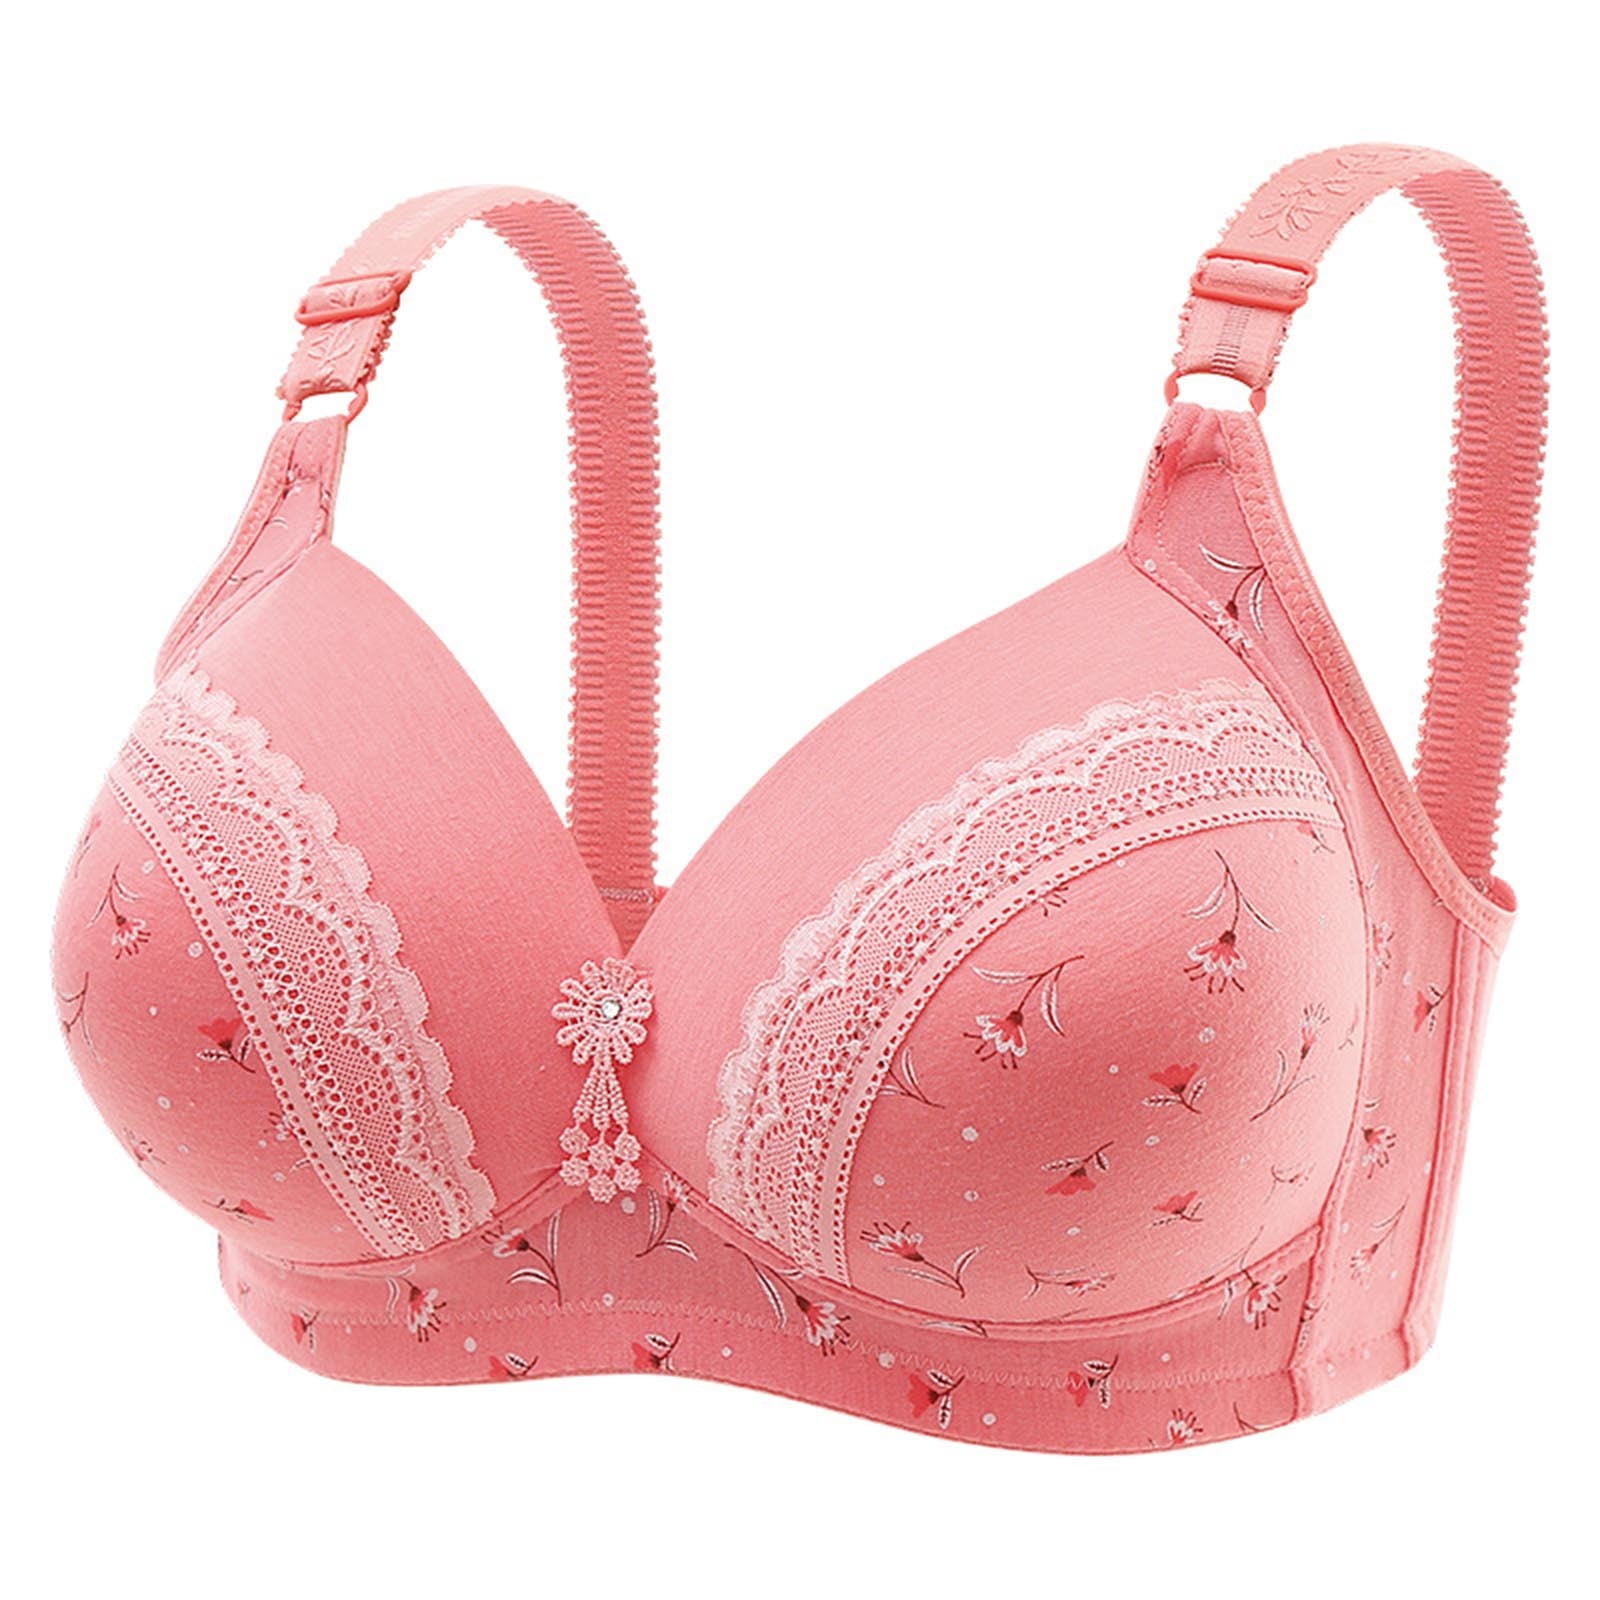 The Breakout Bras Comprehensive Sizing Guide  Bra fitting guide, Perfect bra  fit, Bra size charts